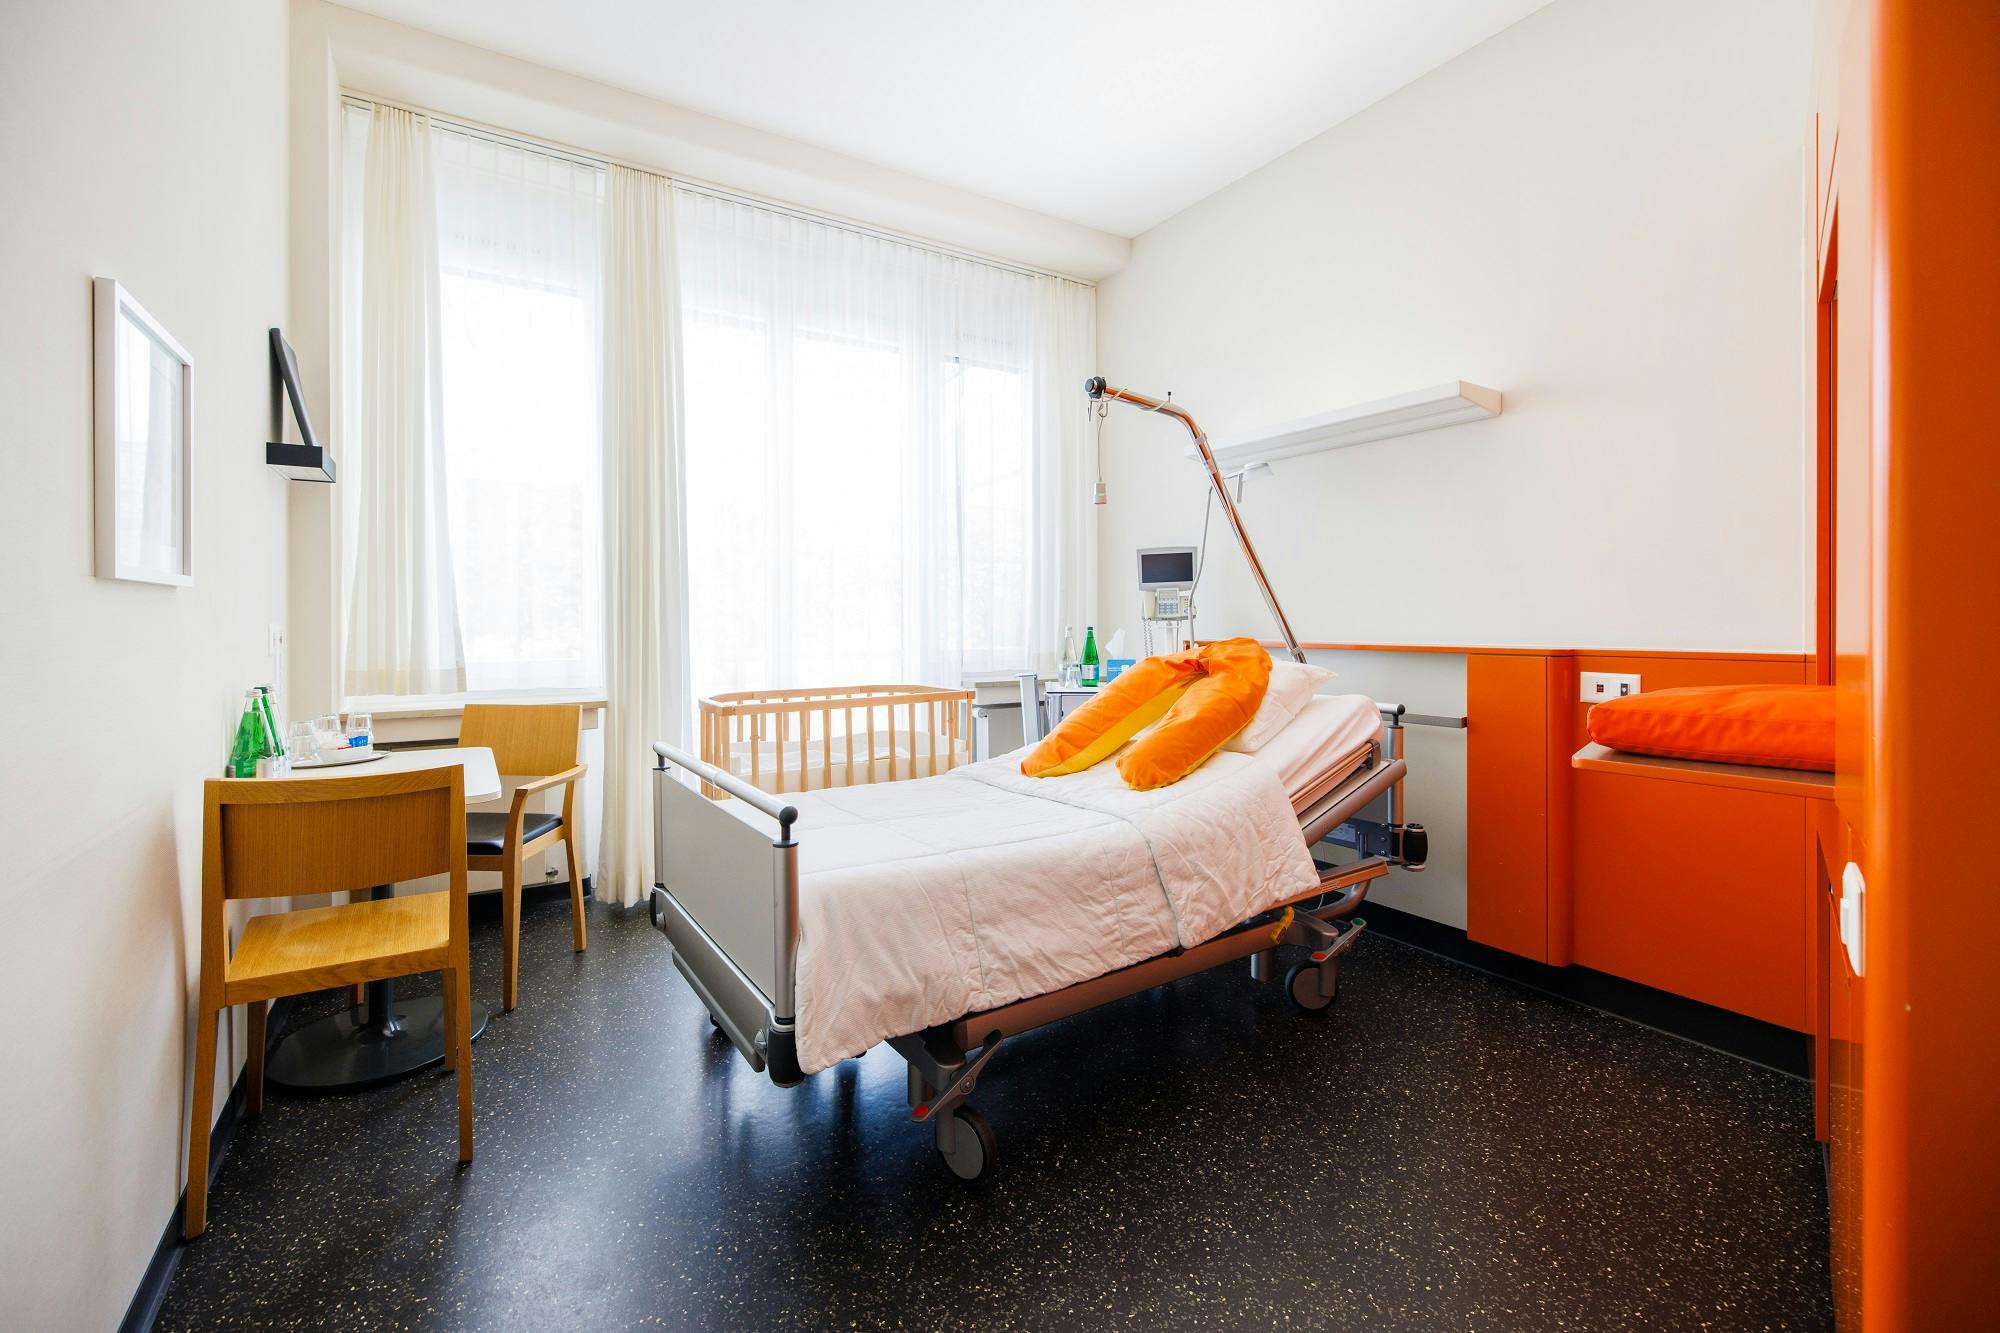 Hospital room with bed, bedside table and window.